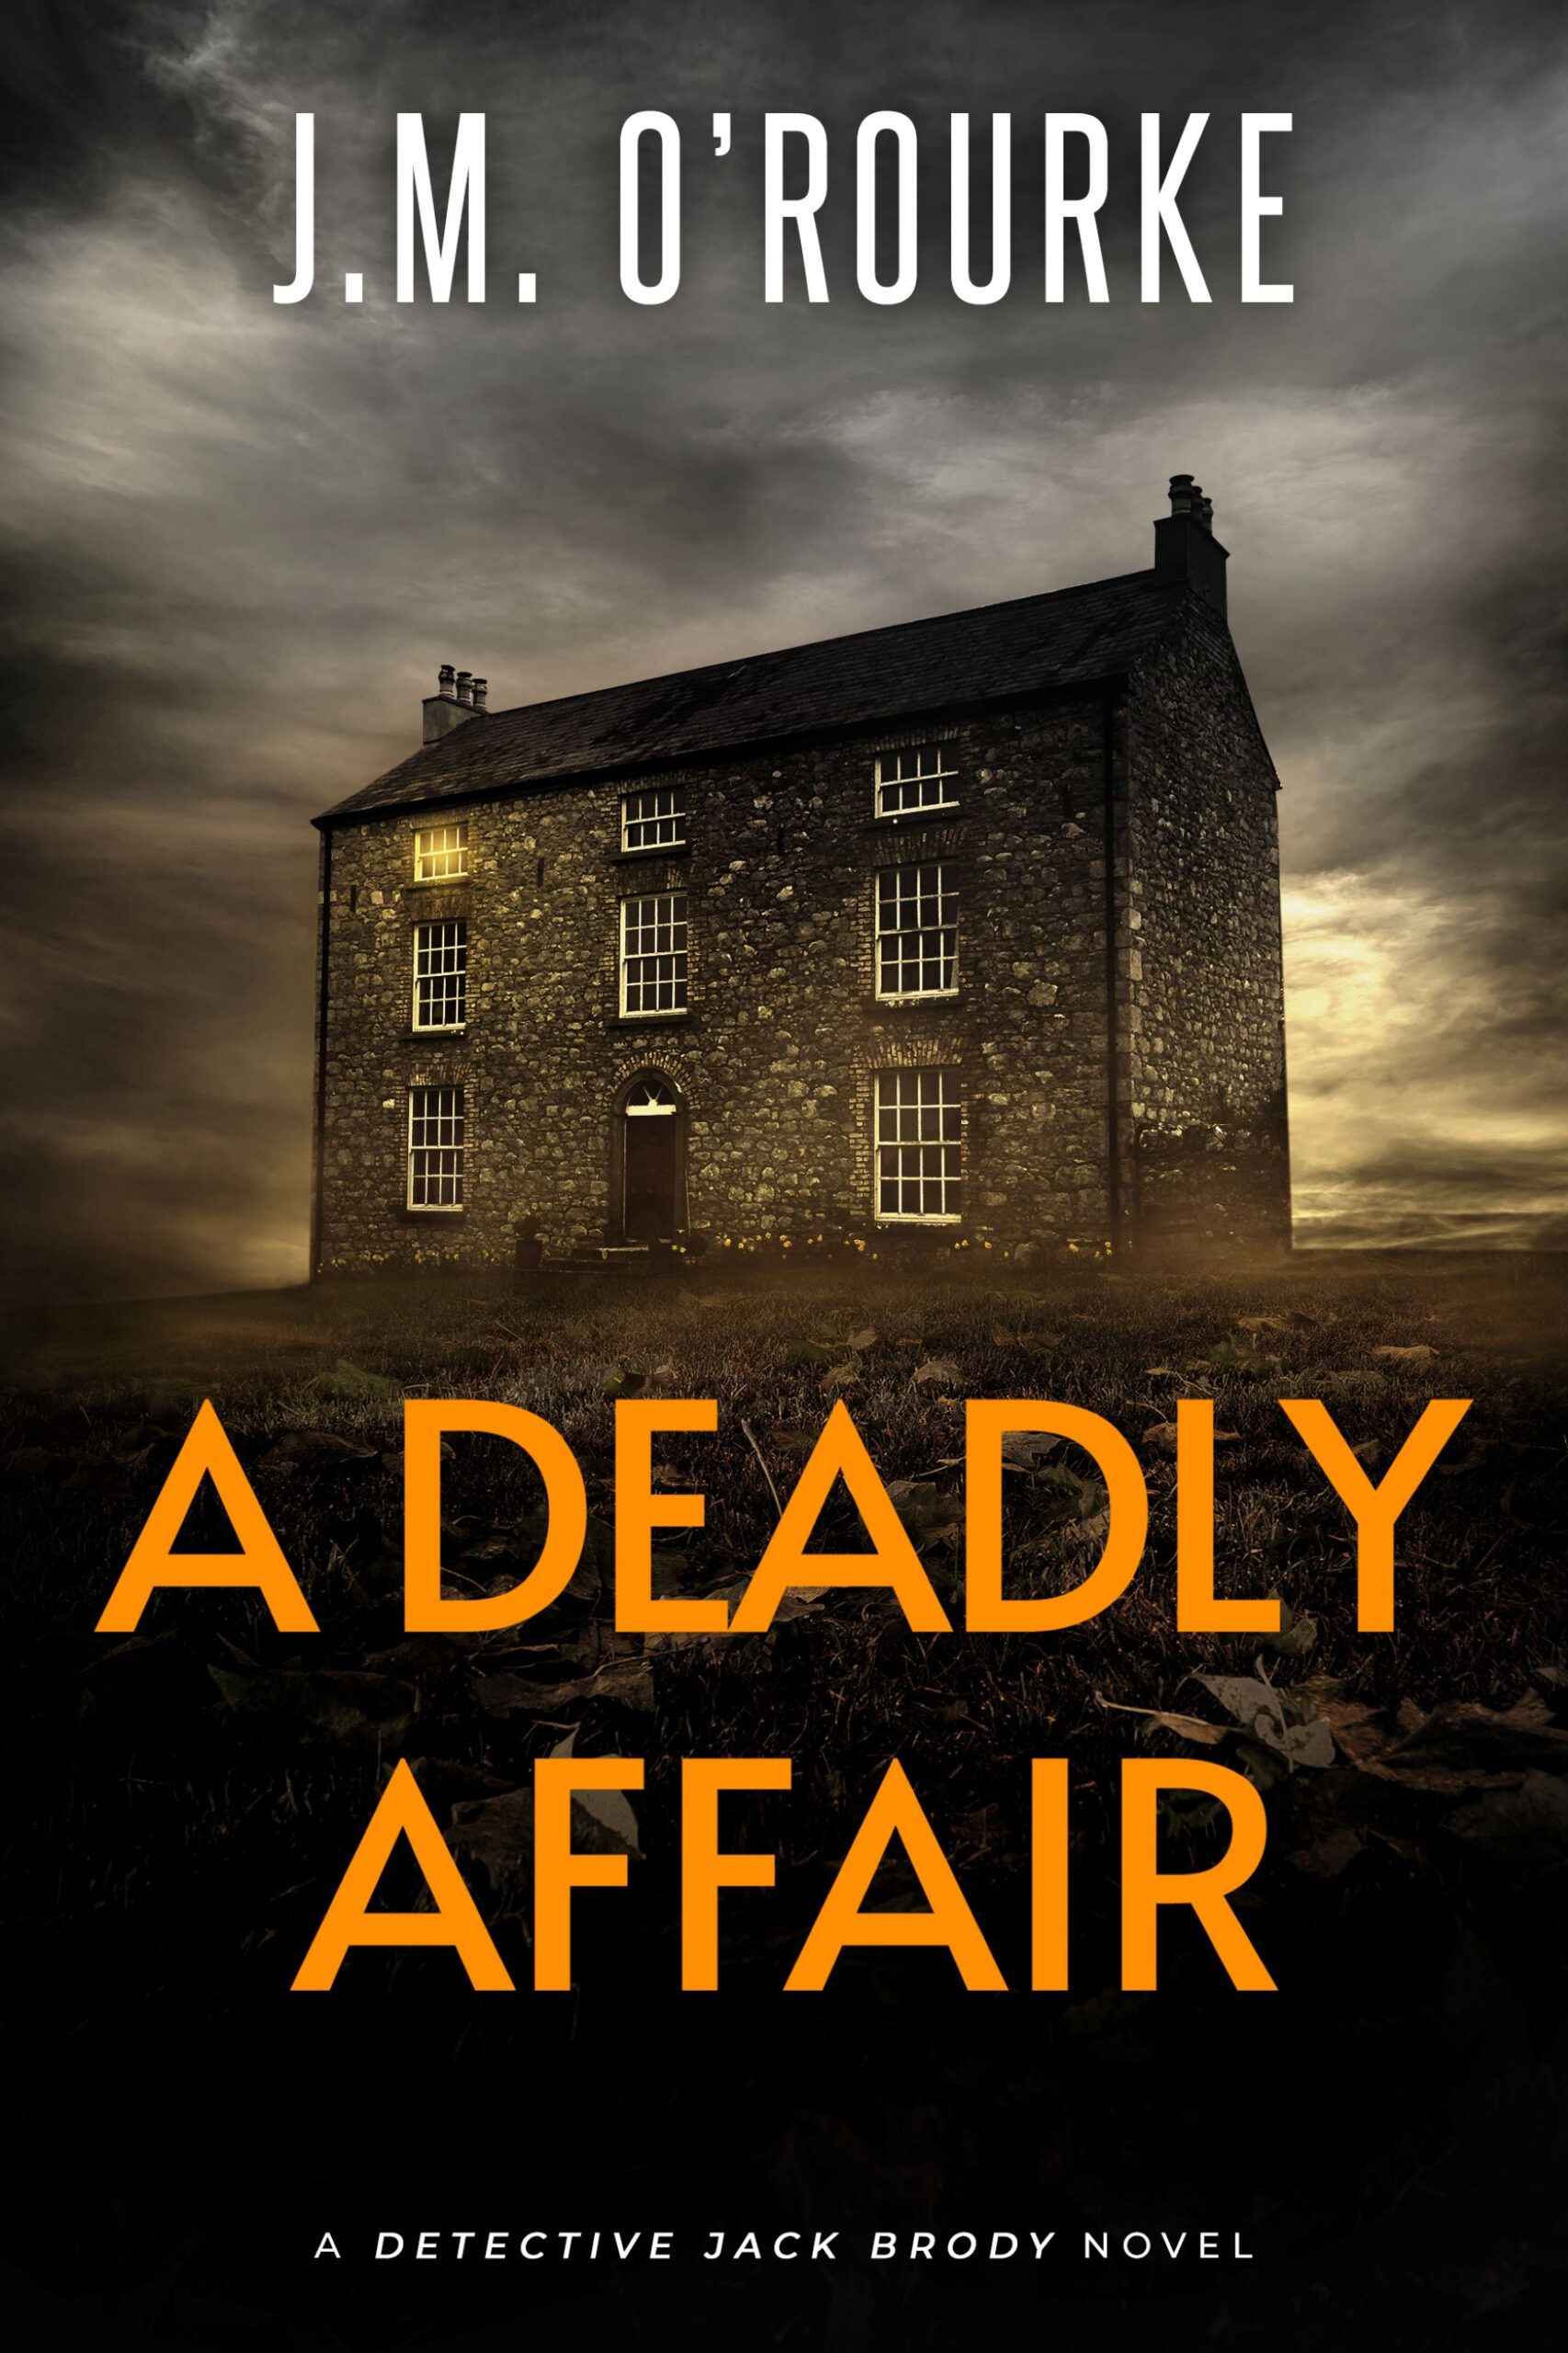 J.M. O’ROURKE NEW RELEASE – A DEADLY AFFAIR